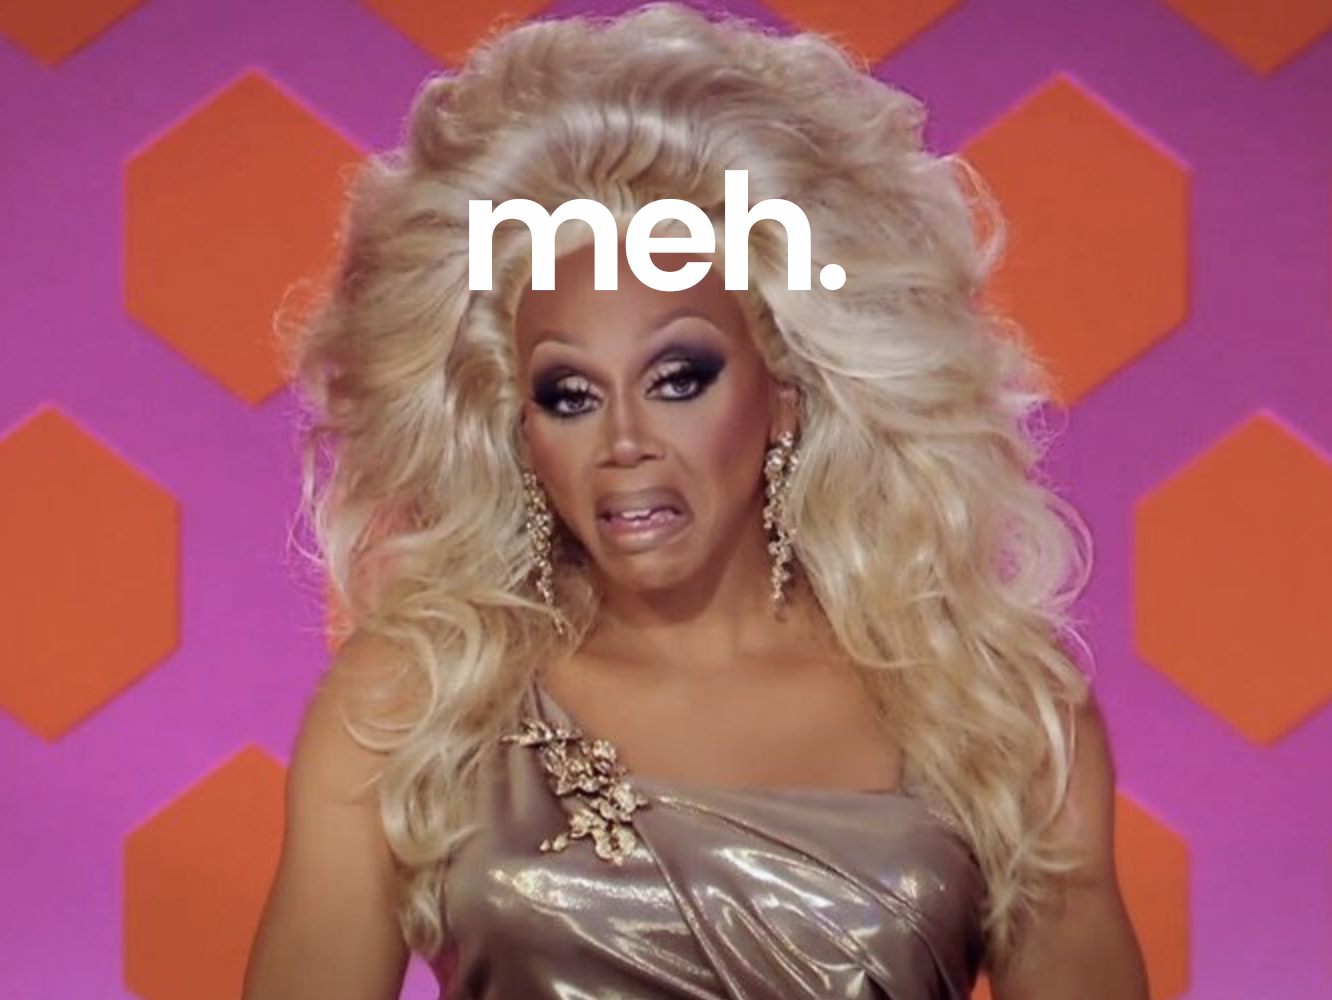 RuPaul not really liking what he see